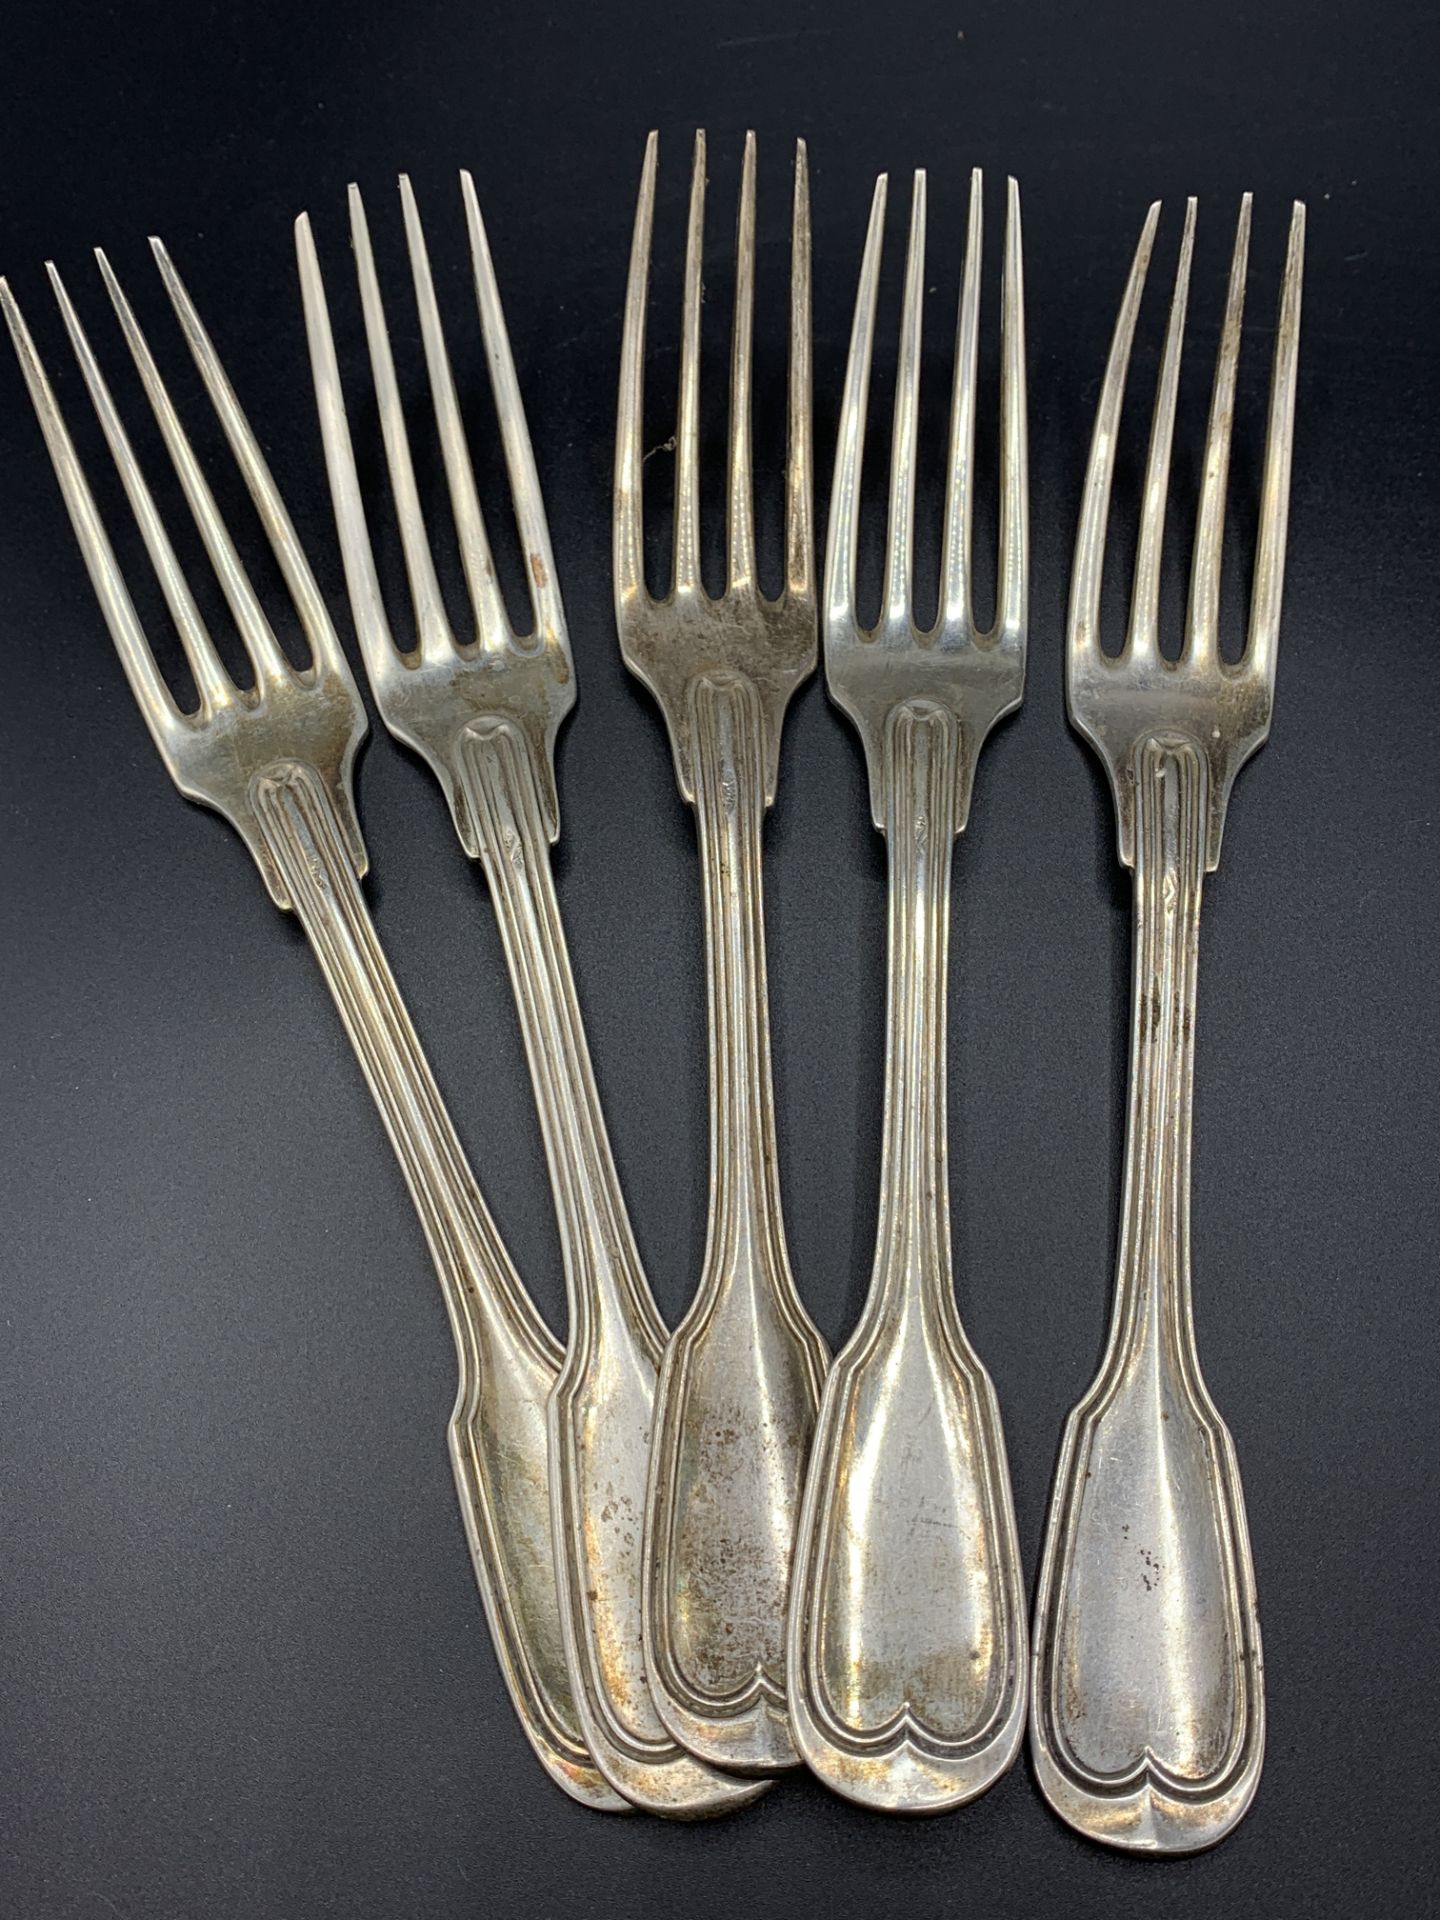 Five large French 800 silver forks